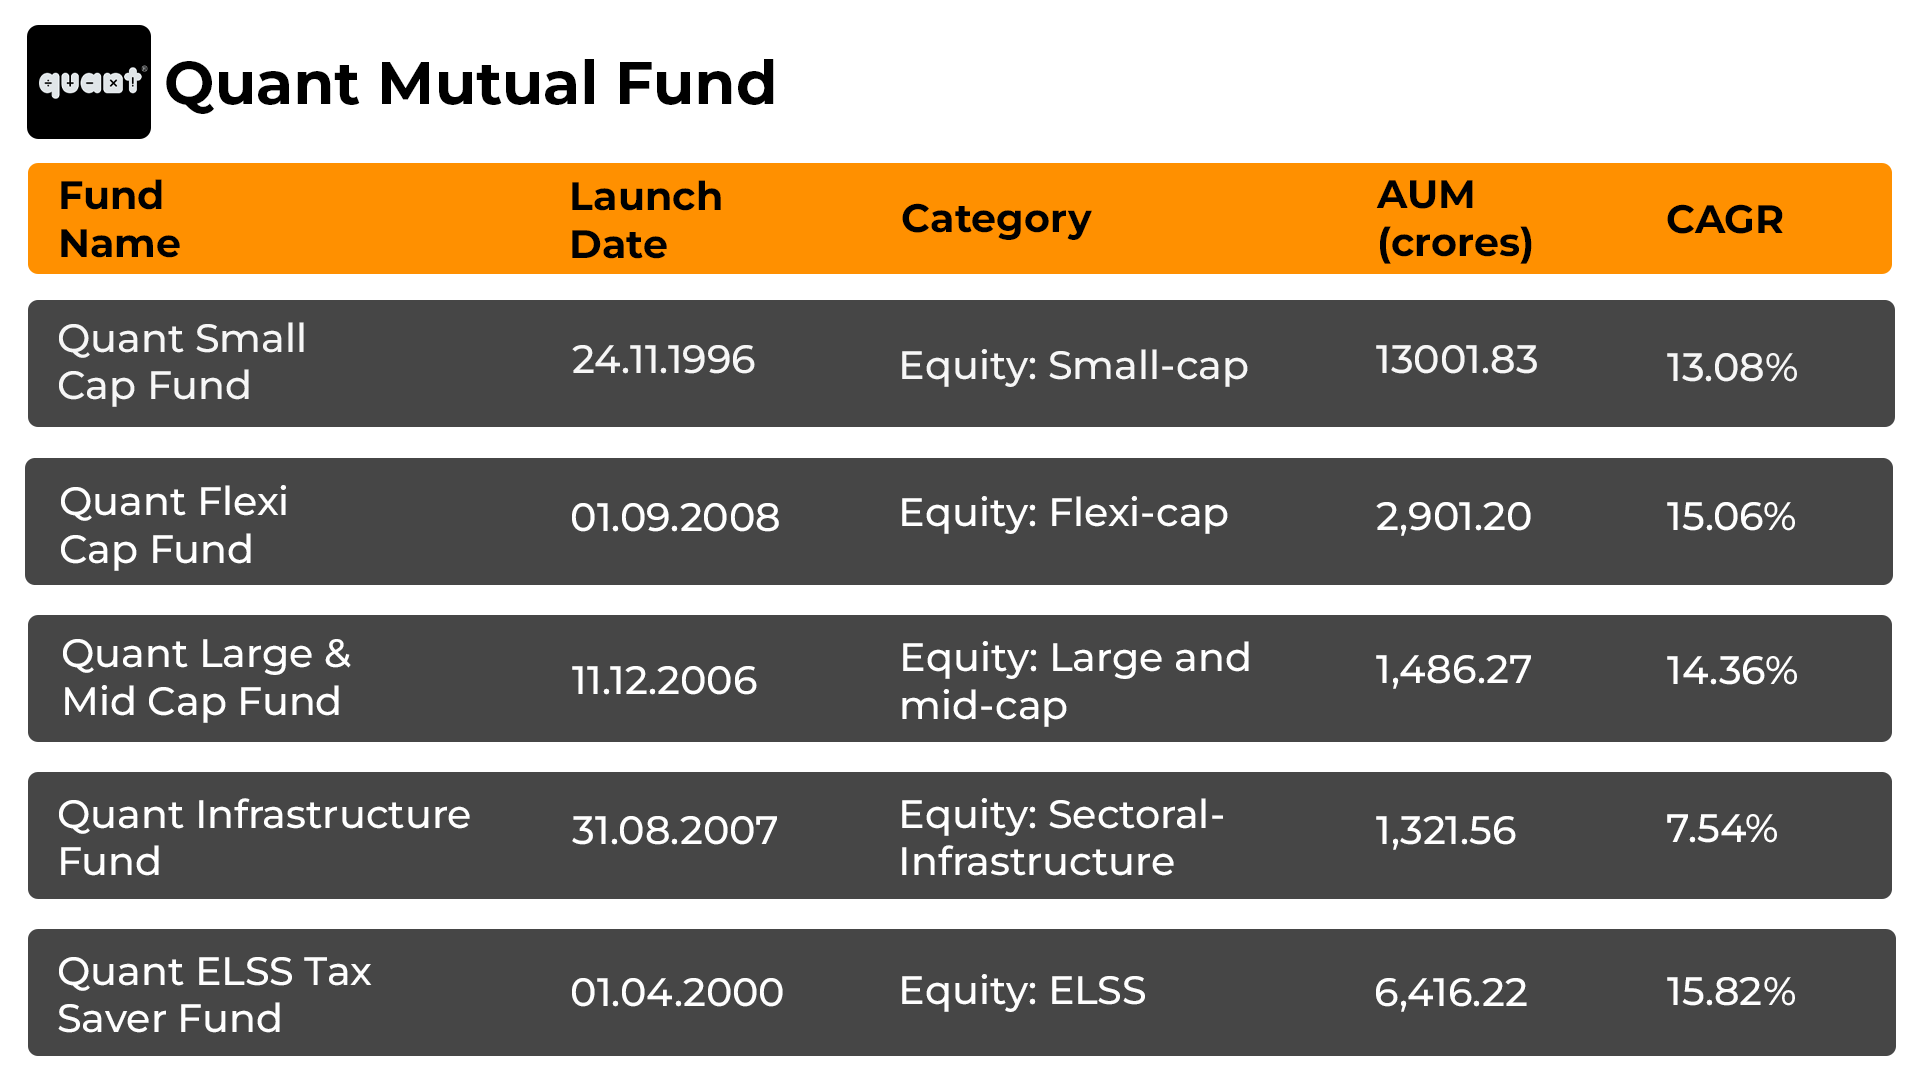 Quant Mutual Fund Top Funds